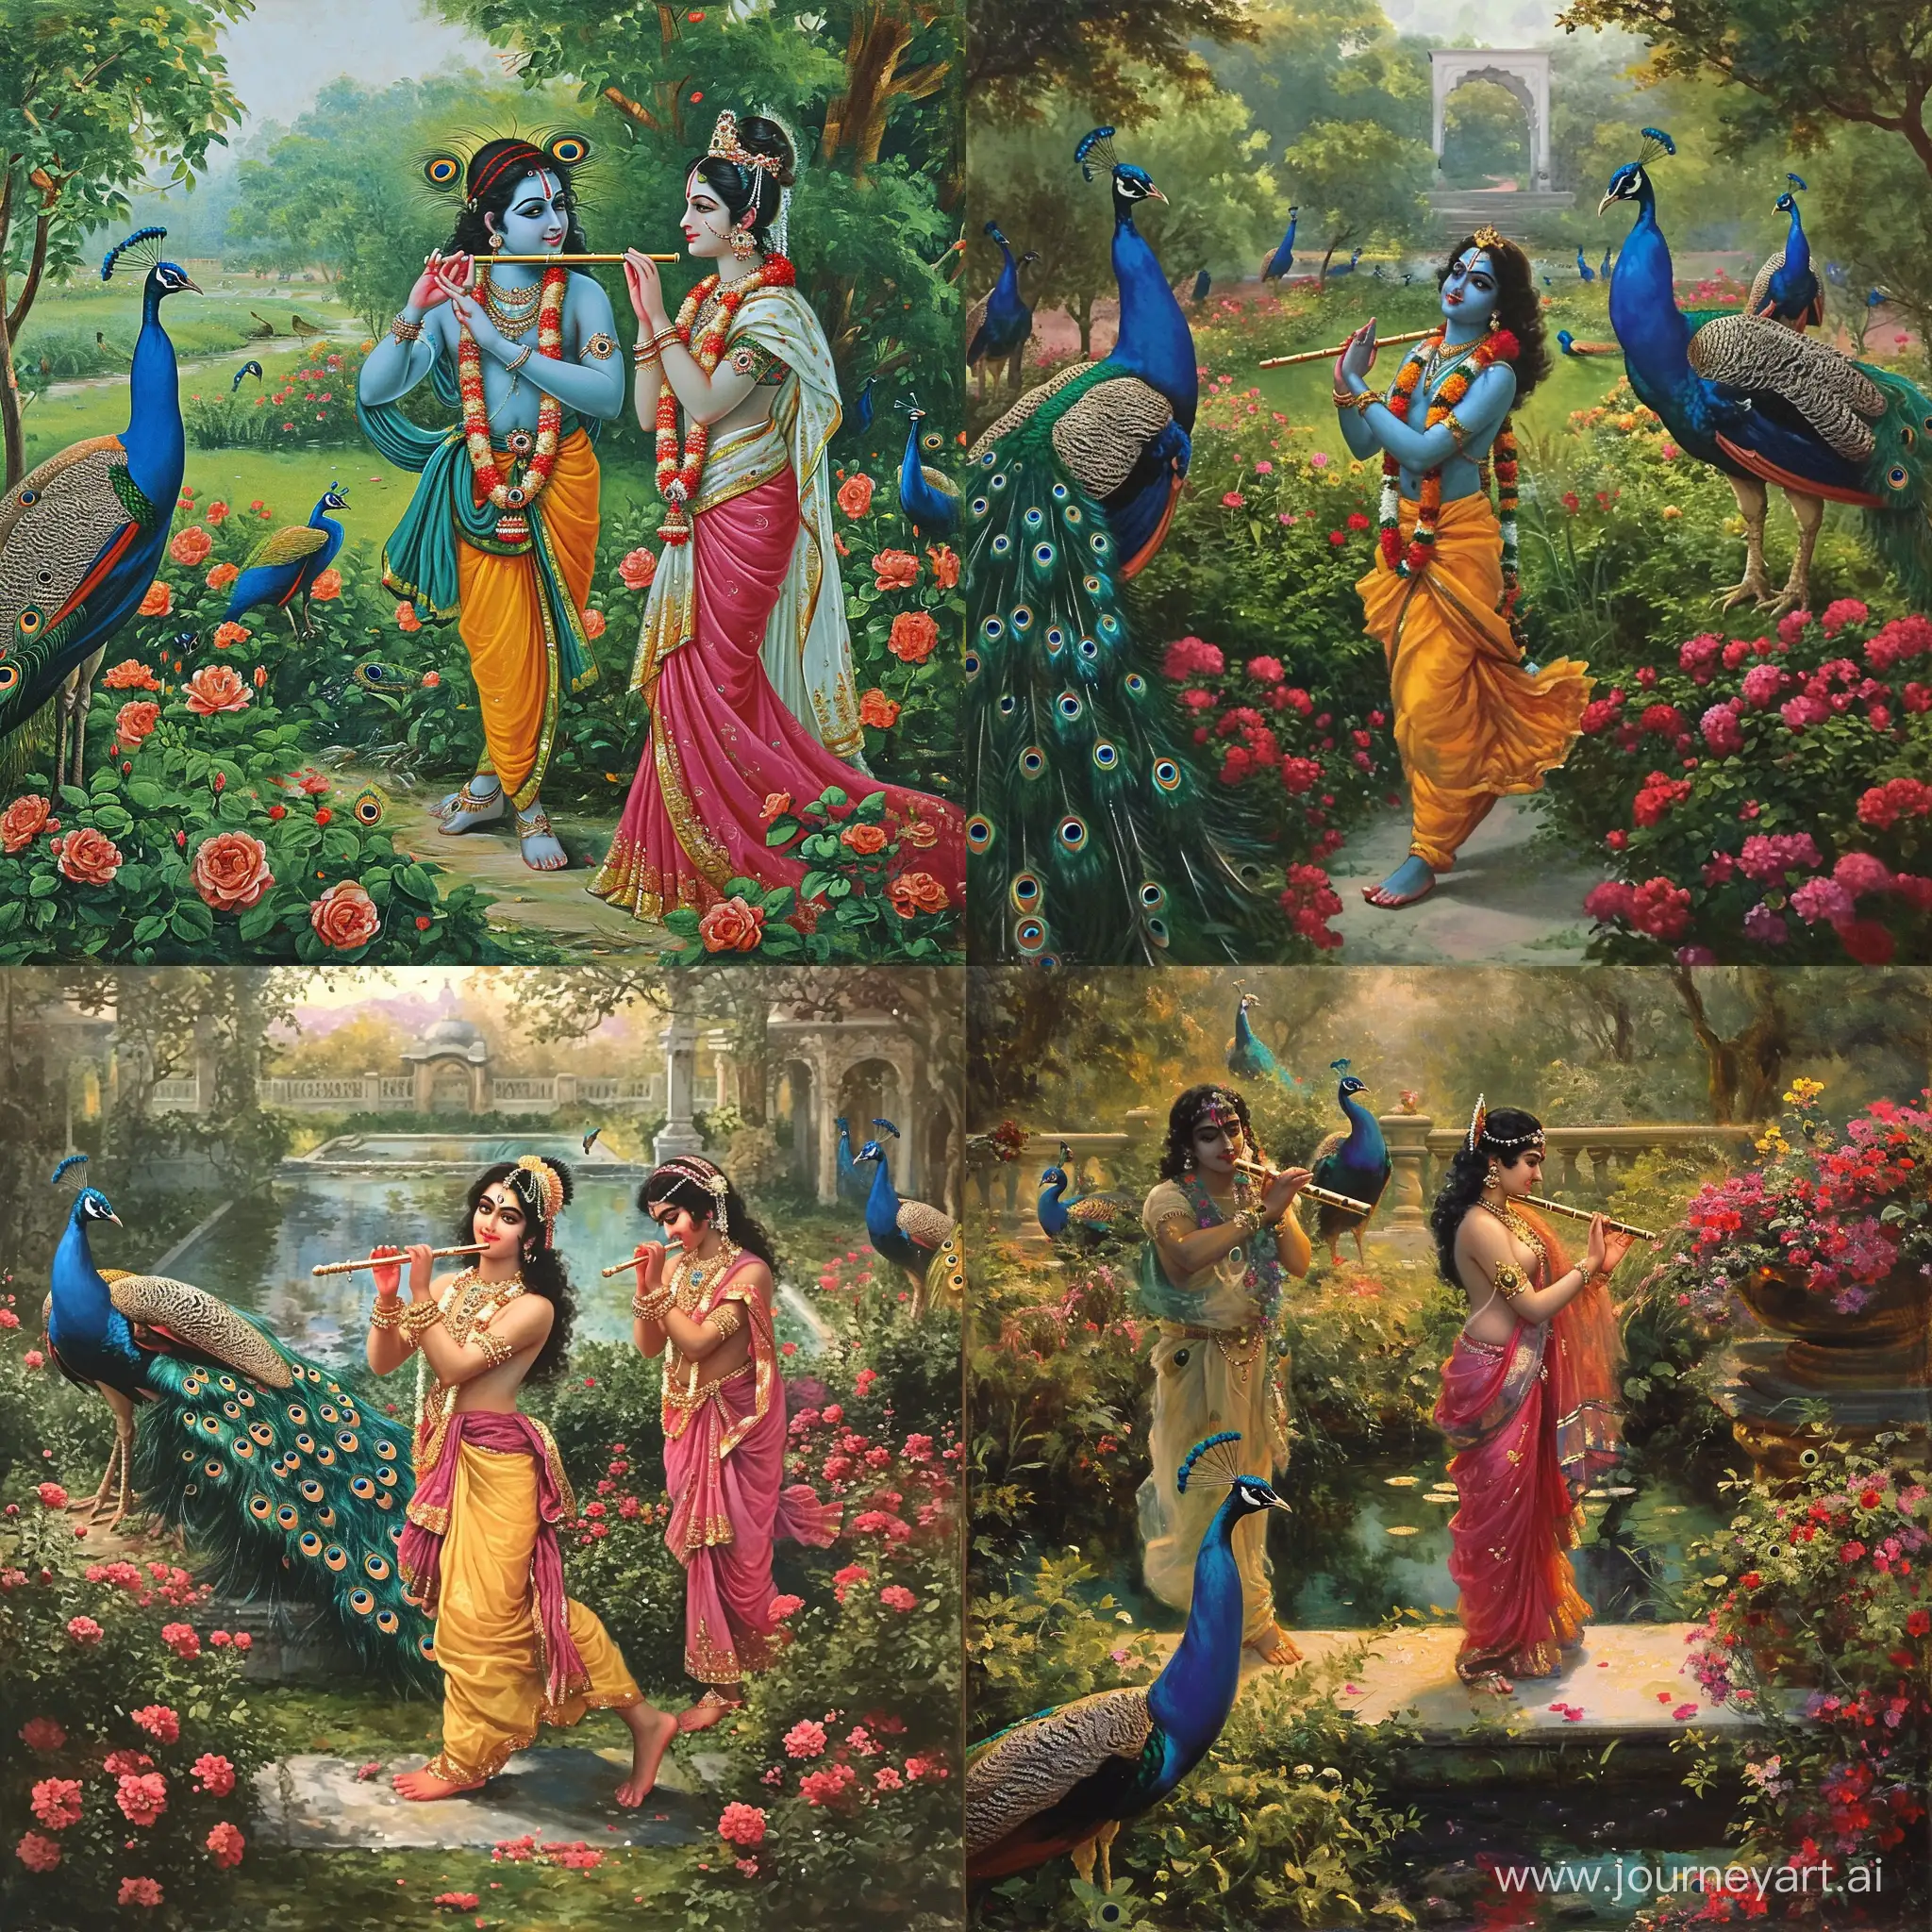 Divine-Harmony-Krishna-Playing-Flute-in-Garden-with-Peacocks